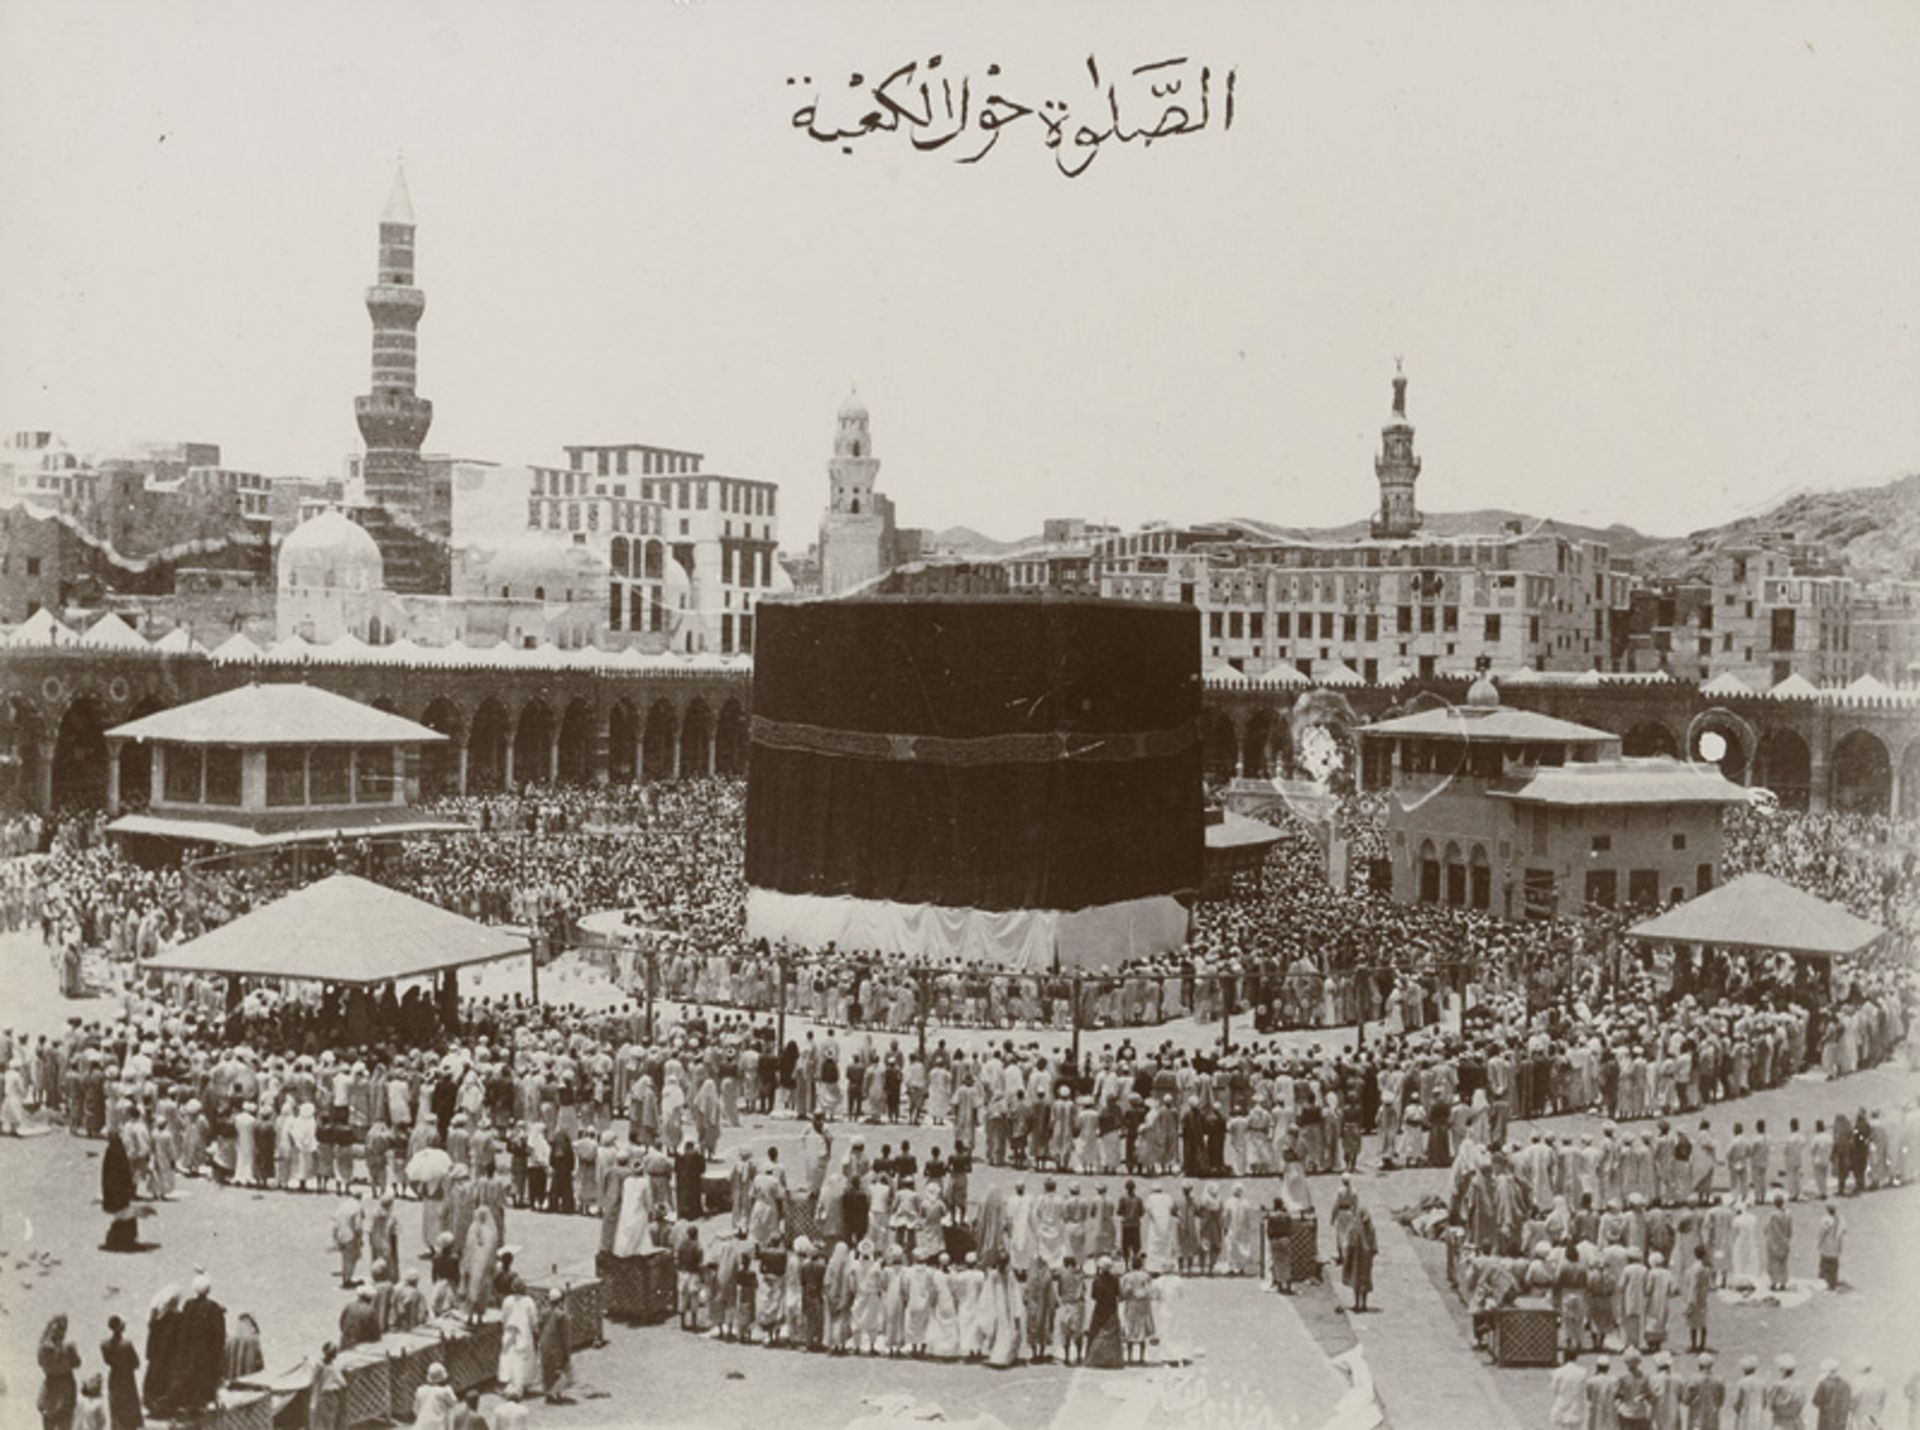 Mecca: View of Mecca and the Kaaba during the Hajj